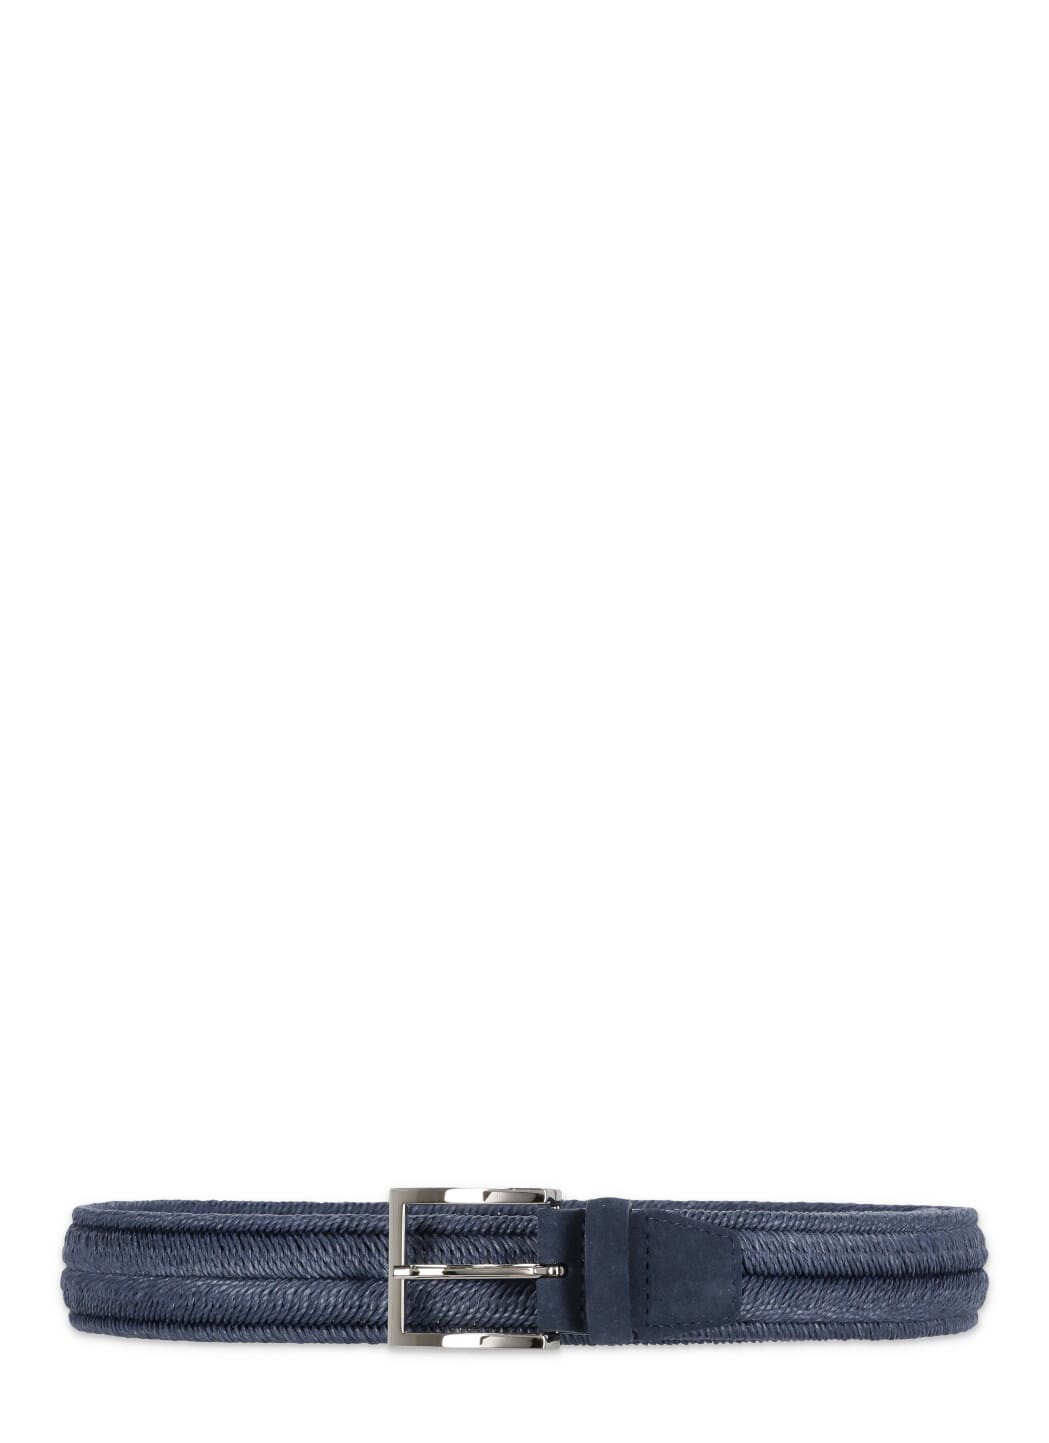 Orciani Notte Braided Leather Belt